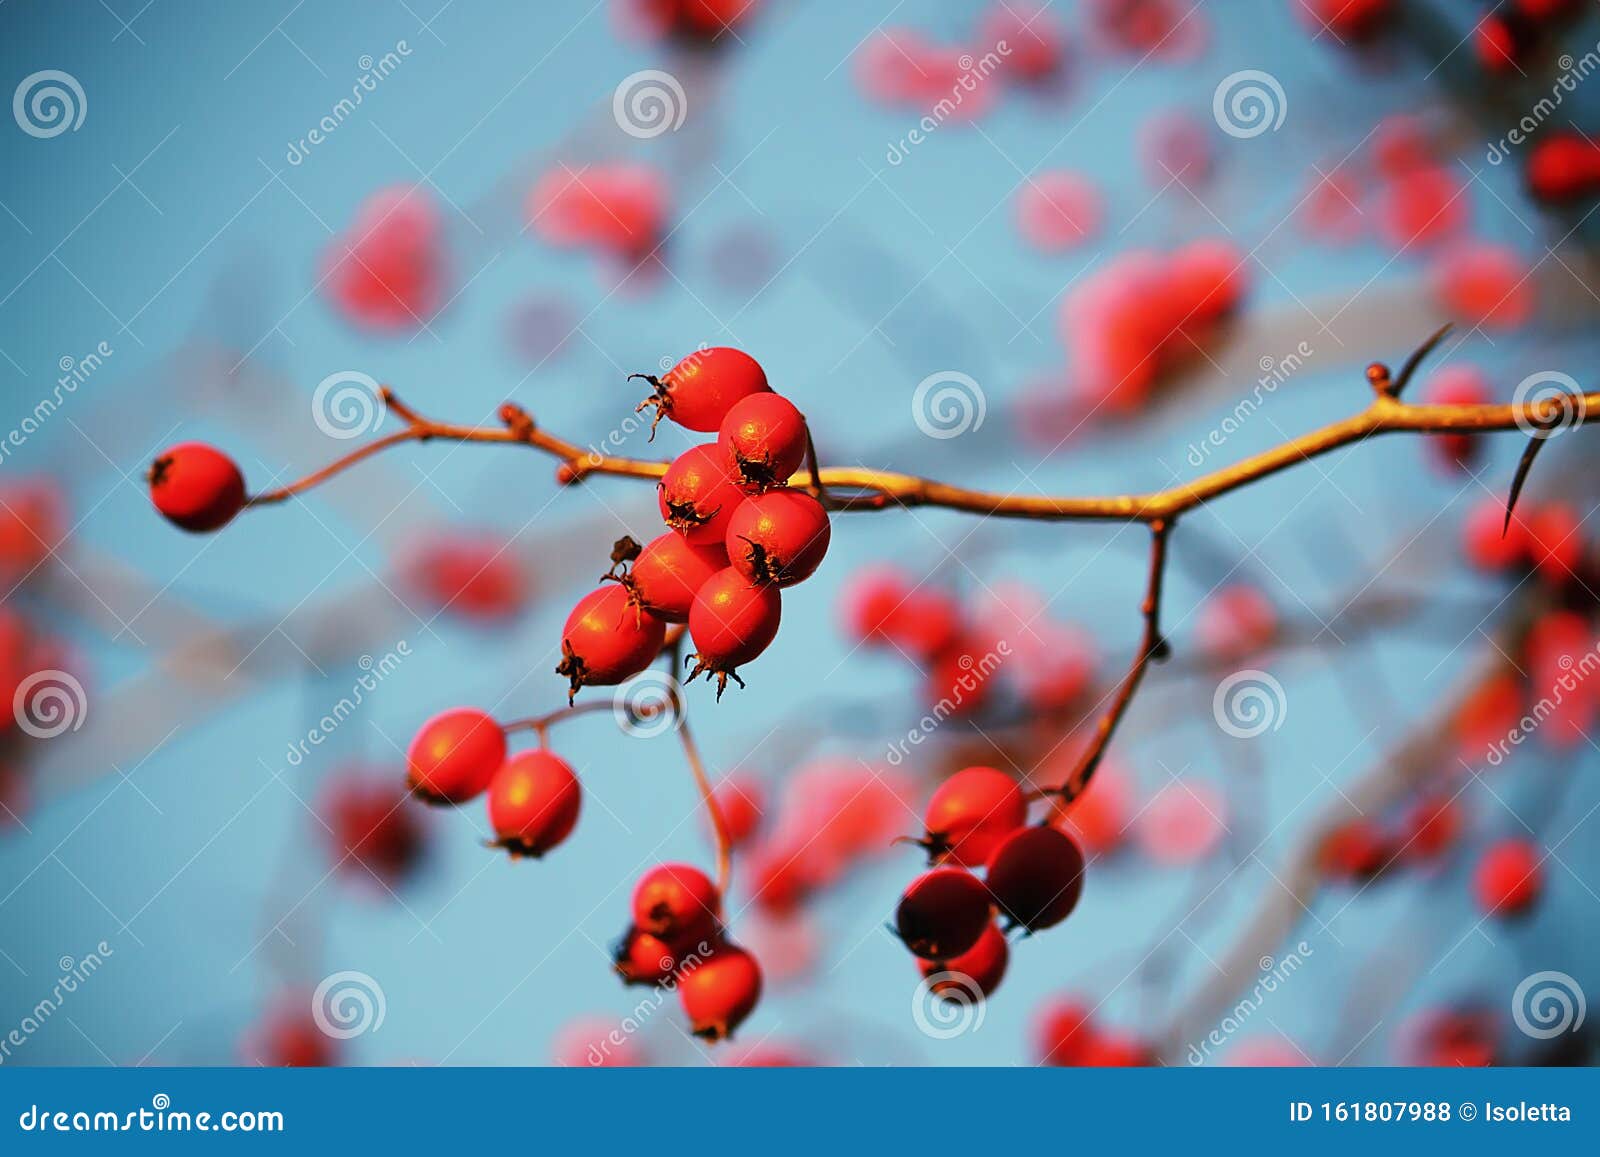 Thorn twigs with berries stock photo. Image of closeup - 161807988